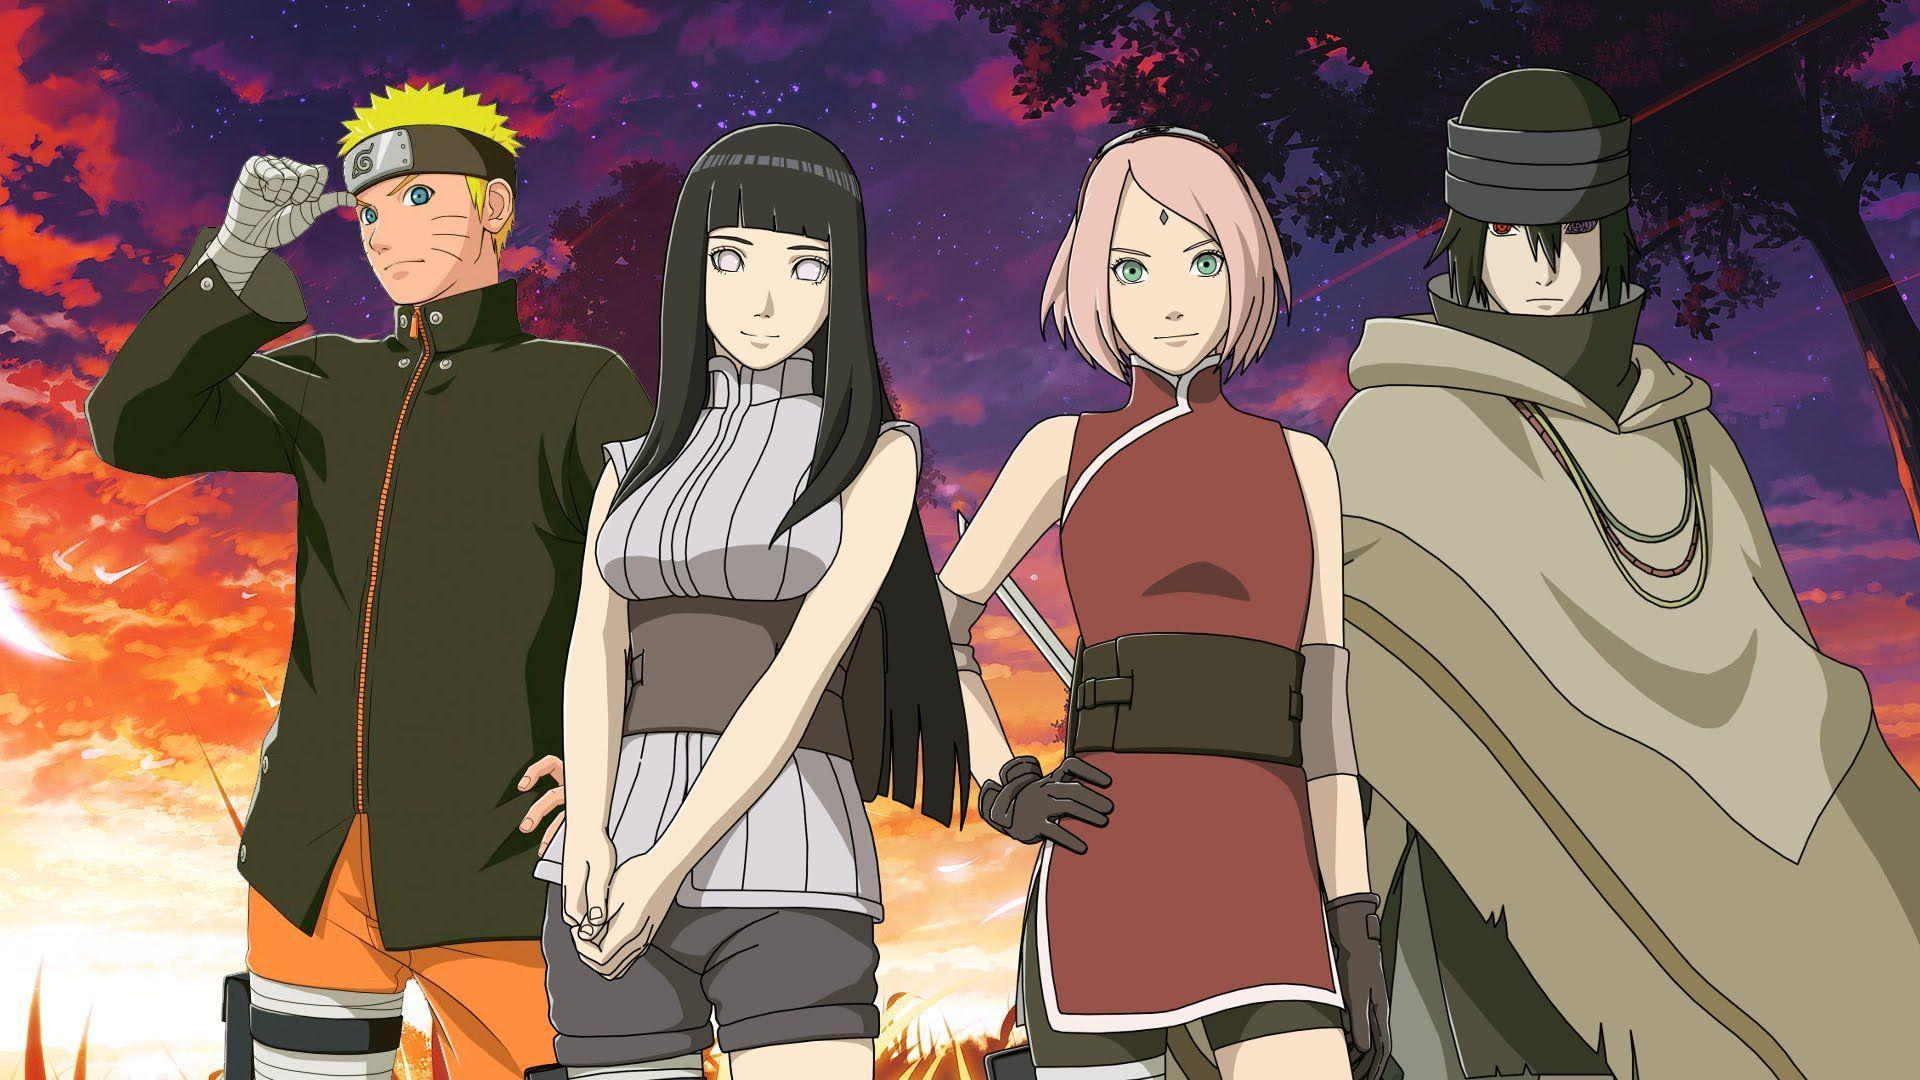 1920x1080 The Last: Naruto Wallpapers